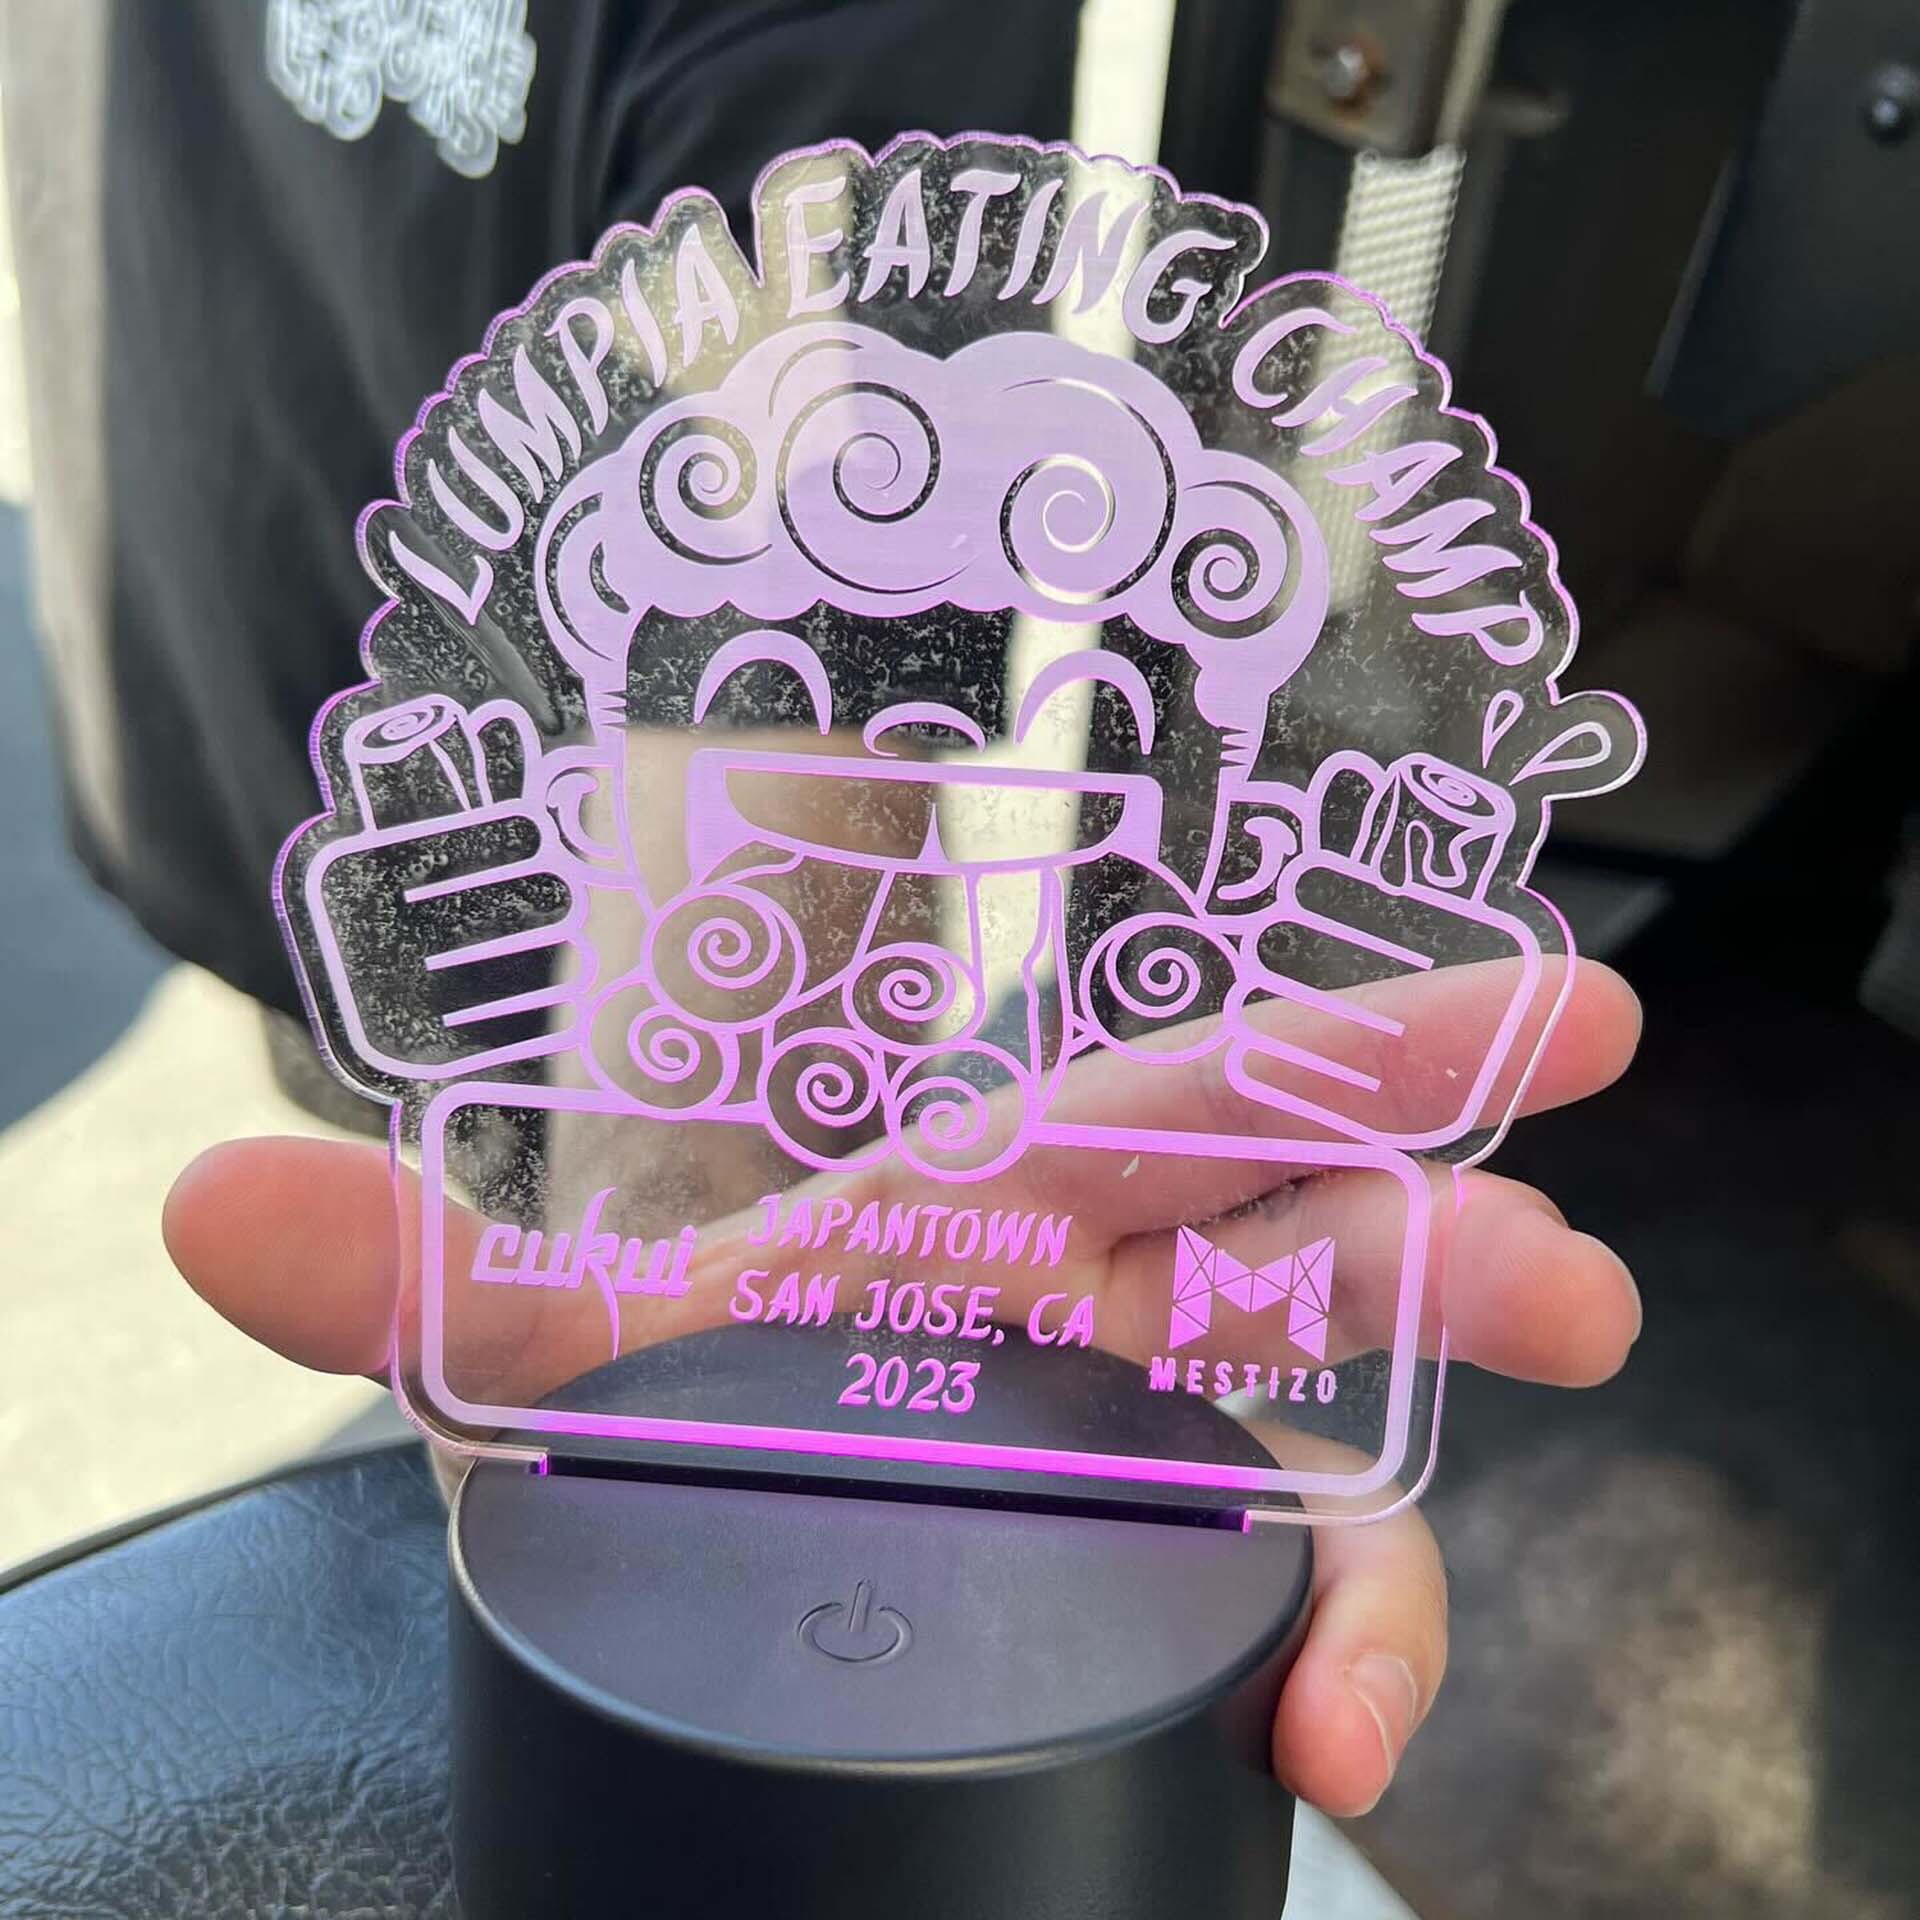 a custom-made award trophy for the winner of the lumpia eating contest in San Jose